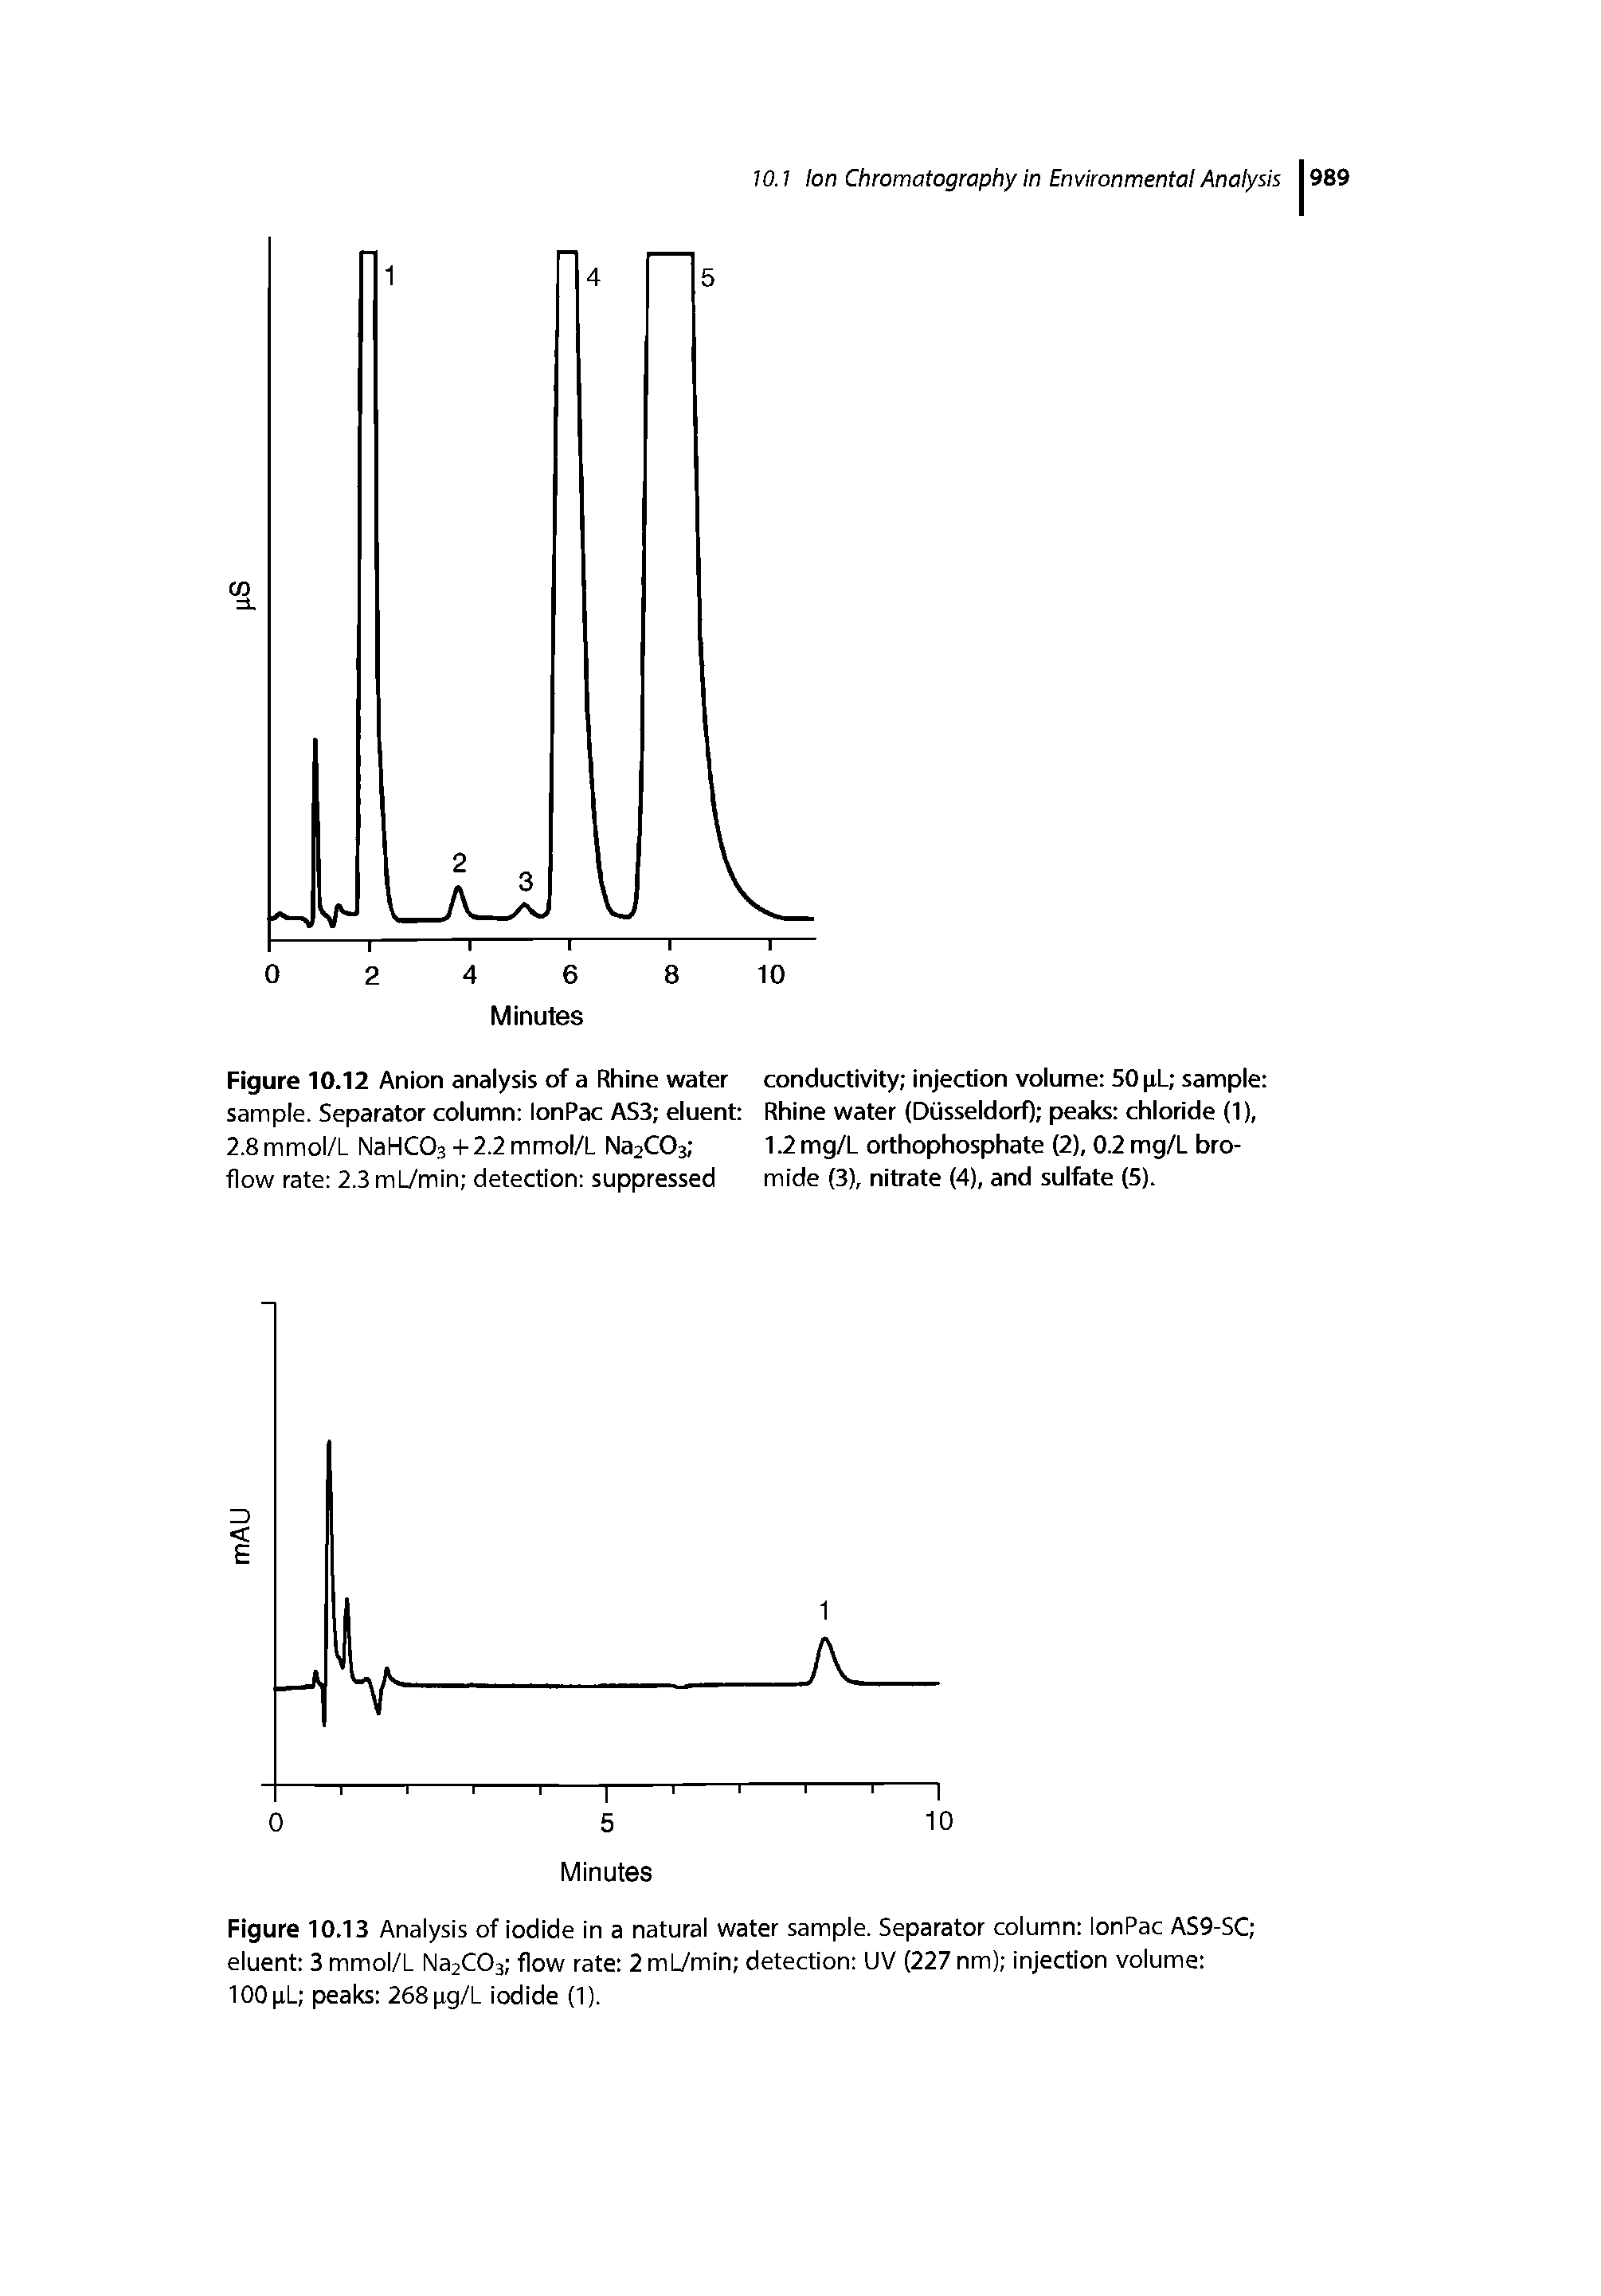 Figure 10.13 Analysis of iodide in a natural water sample. Separator column lonPac AS9-SC eluent 3 mmol/L Na2C03 flow rate 2 mLymin detection UV (227 nm) injection volume 100(iL peaks 268pg/L iodide (1).